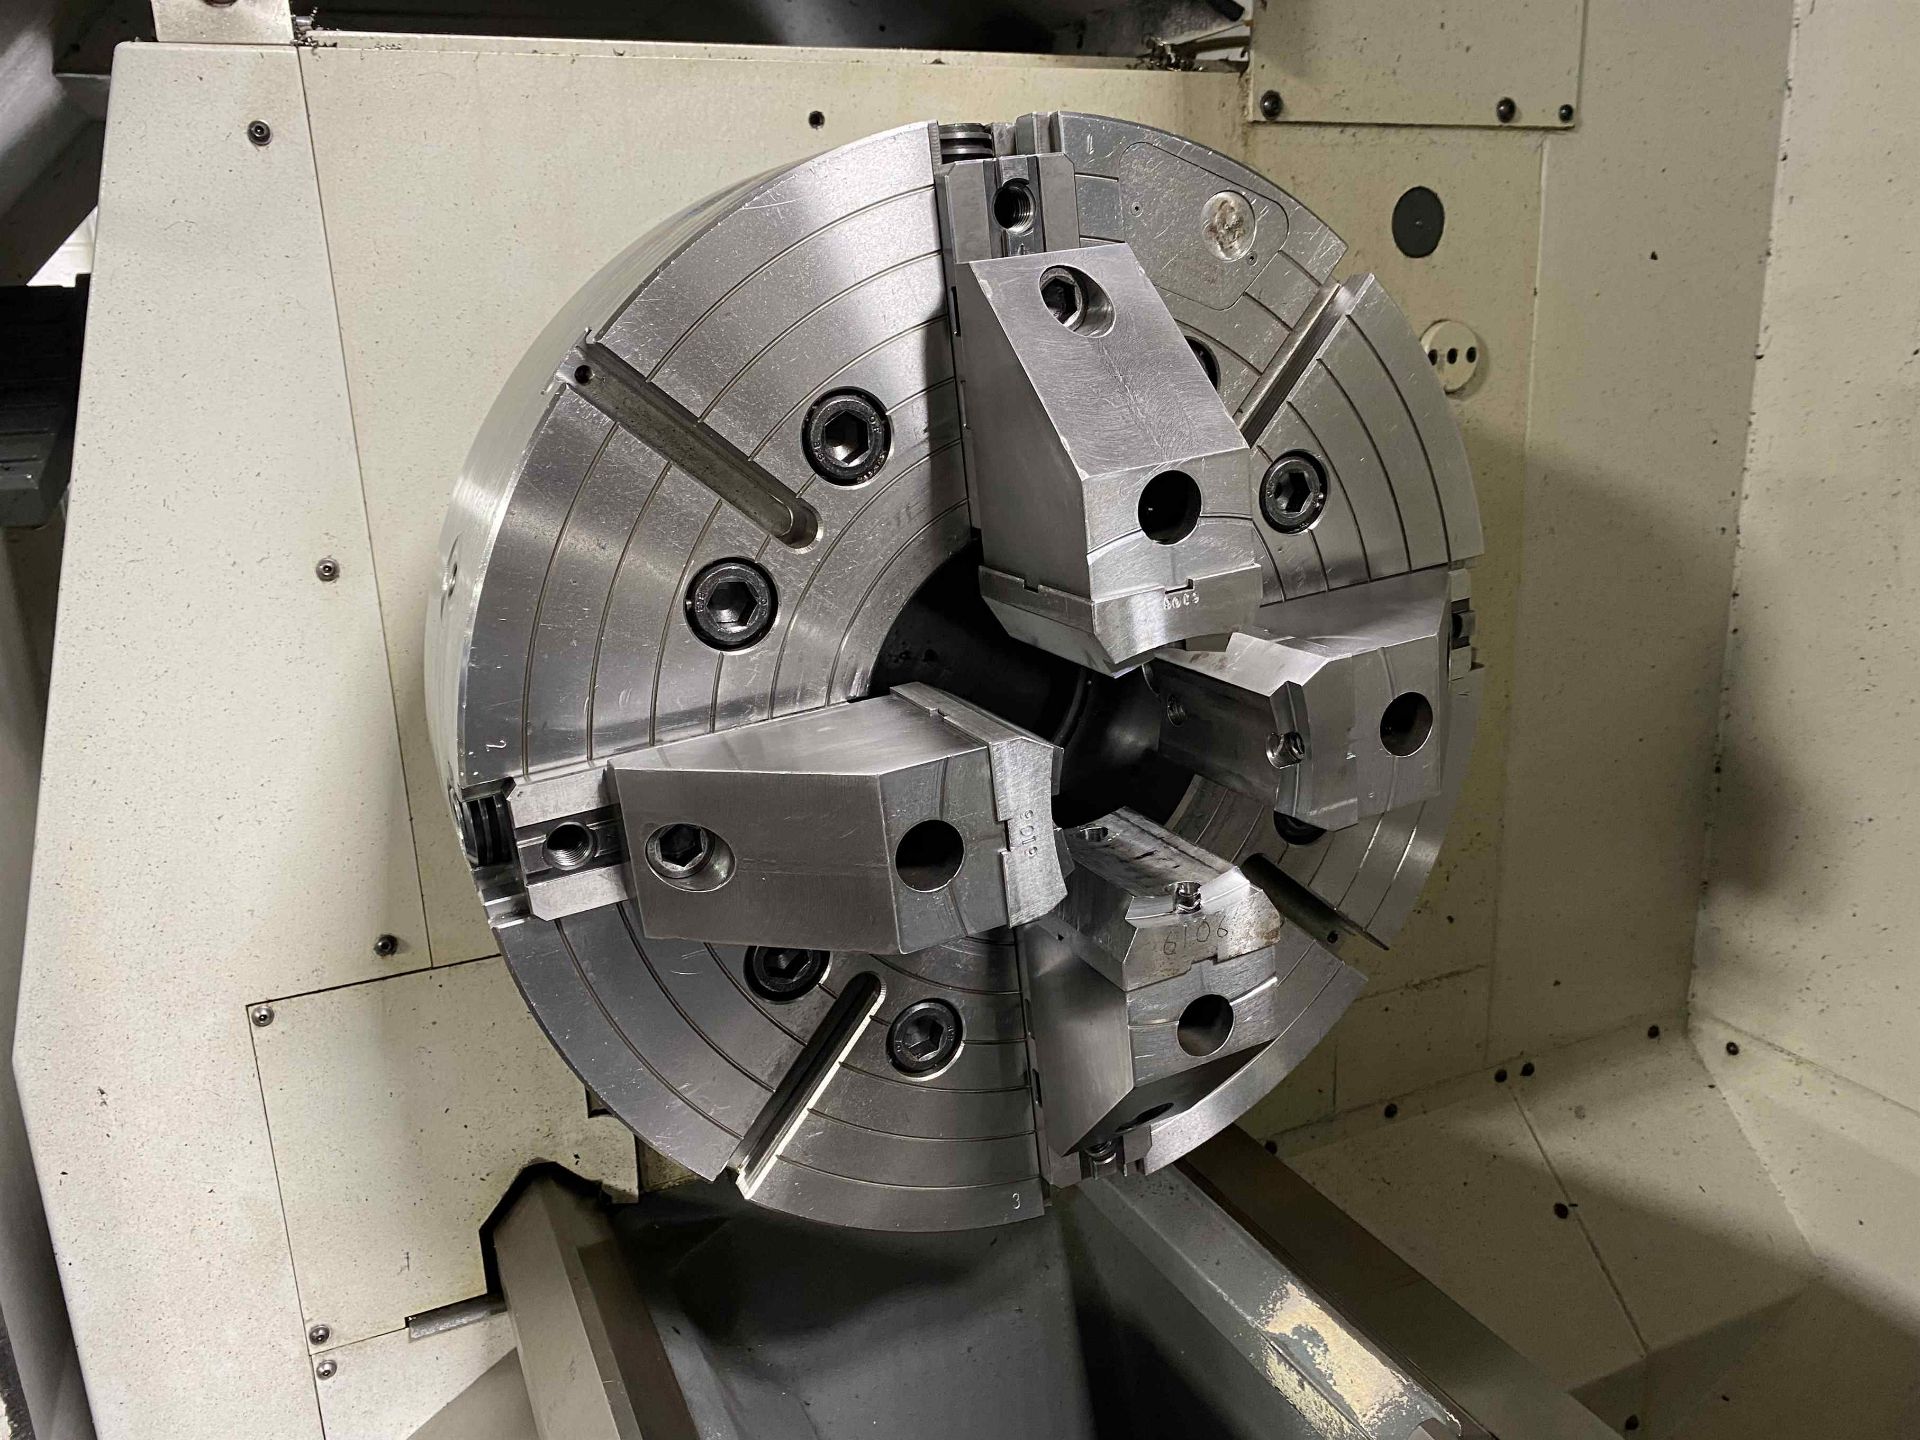 2015 WEILER E70 Cycle-Controlled Lathe, s/n KG01, w/ WEILER Control, (2) 21" 4-Jaw Chucks, 80" Cente - Image 3 of 9